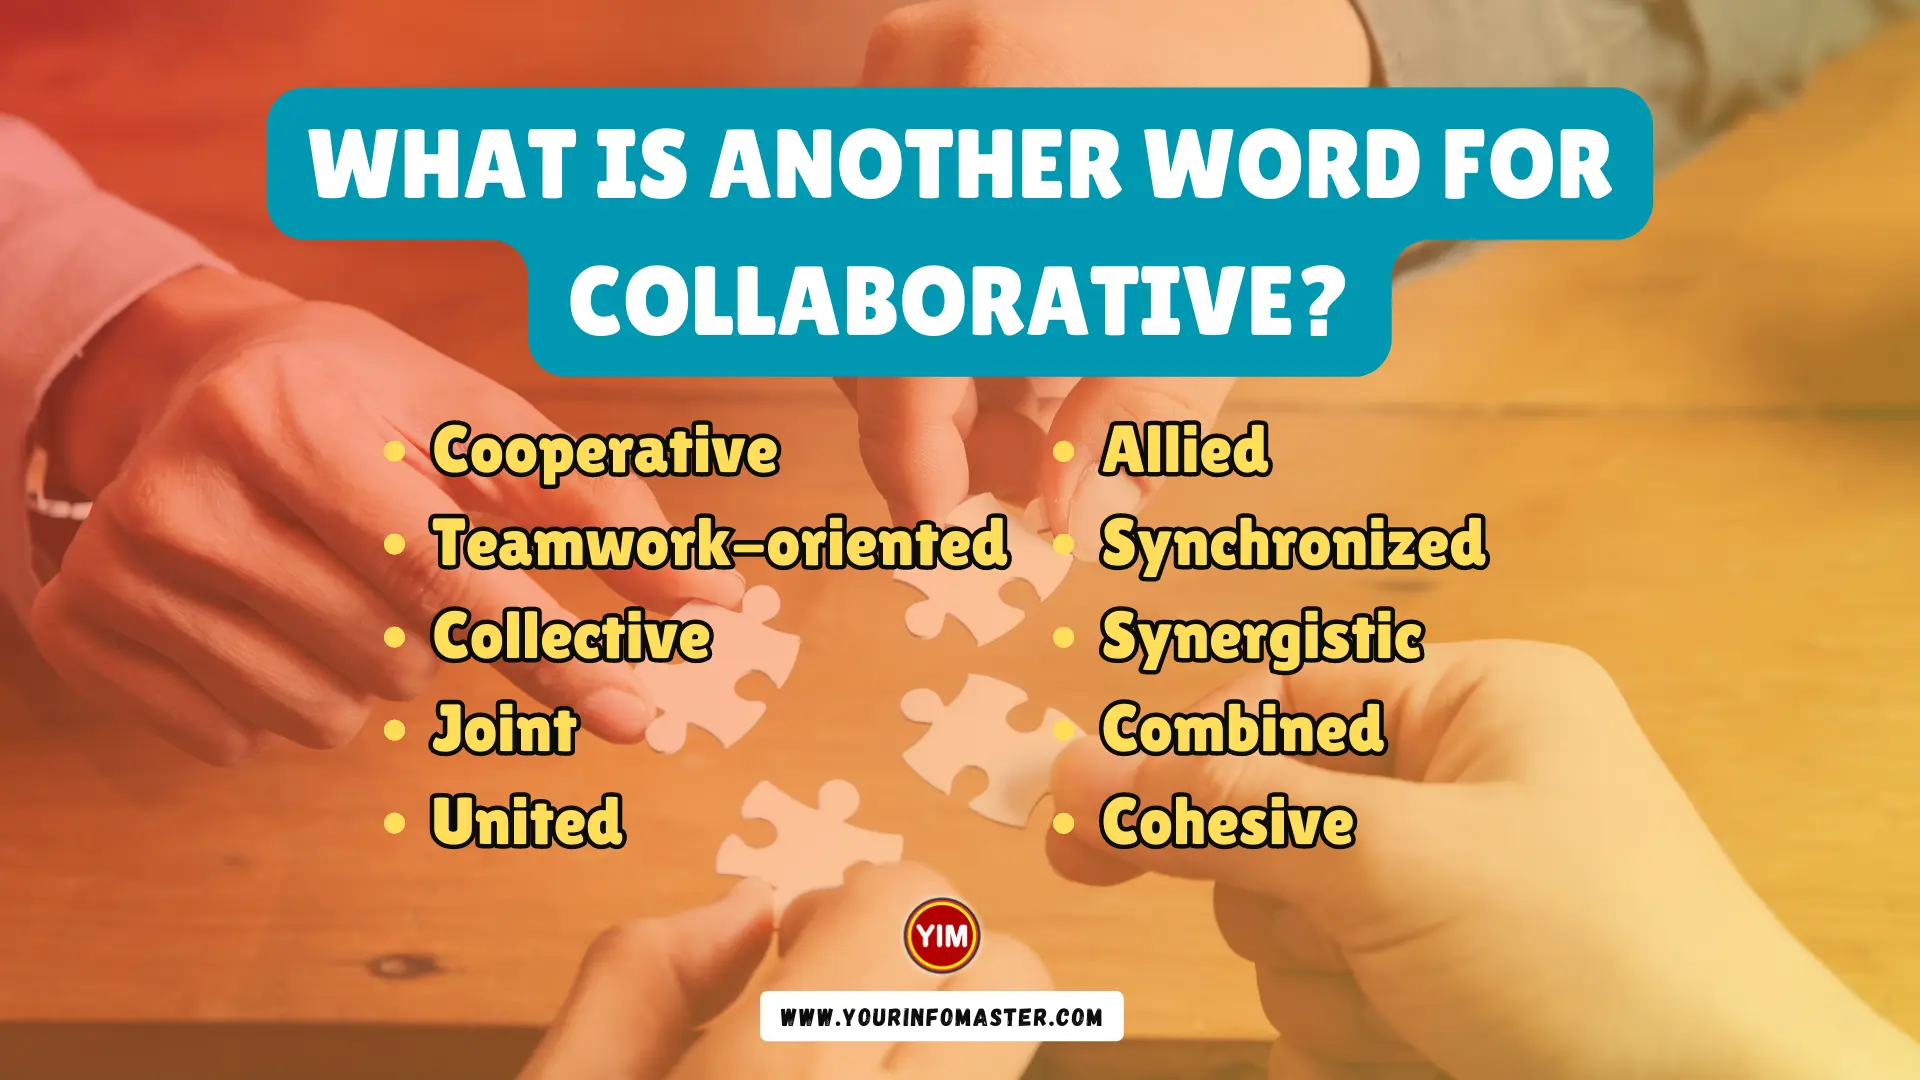 What is another word for Collaborative